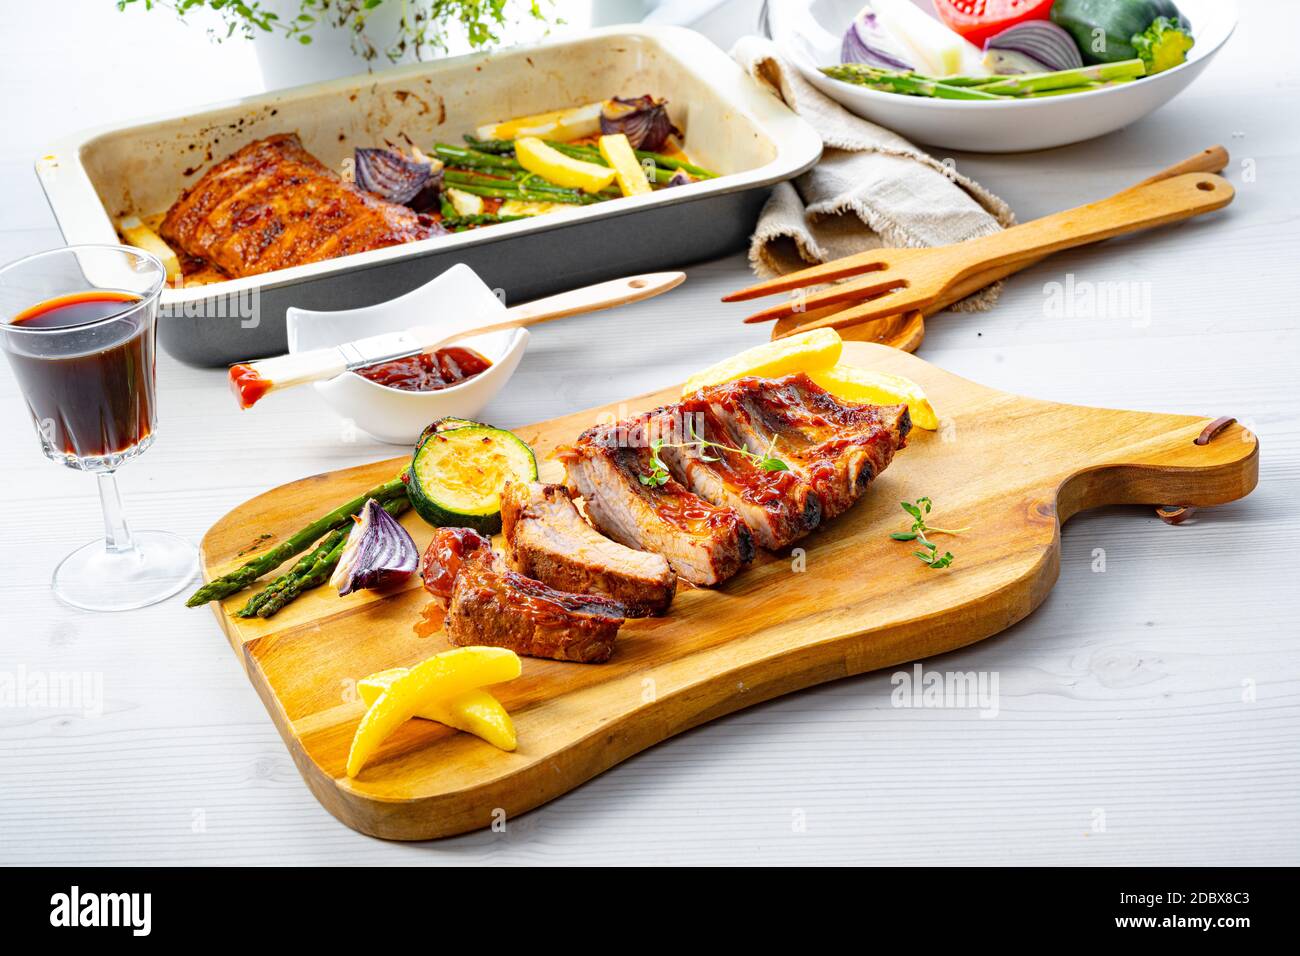 Grilled Sparerib with various vegetables Stock Photo